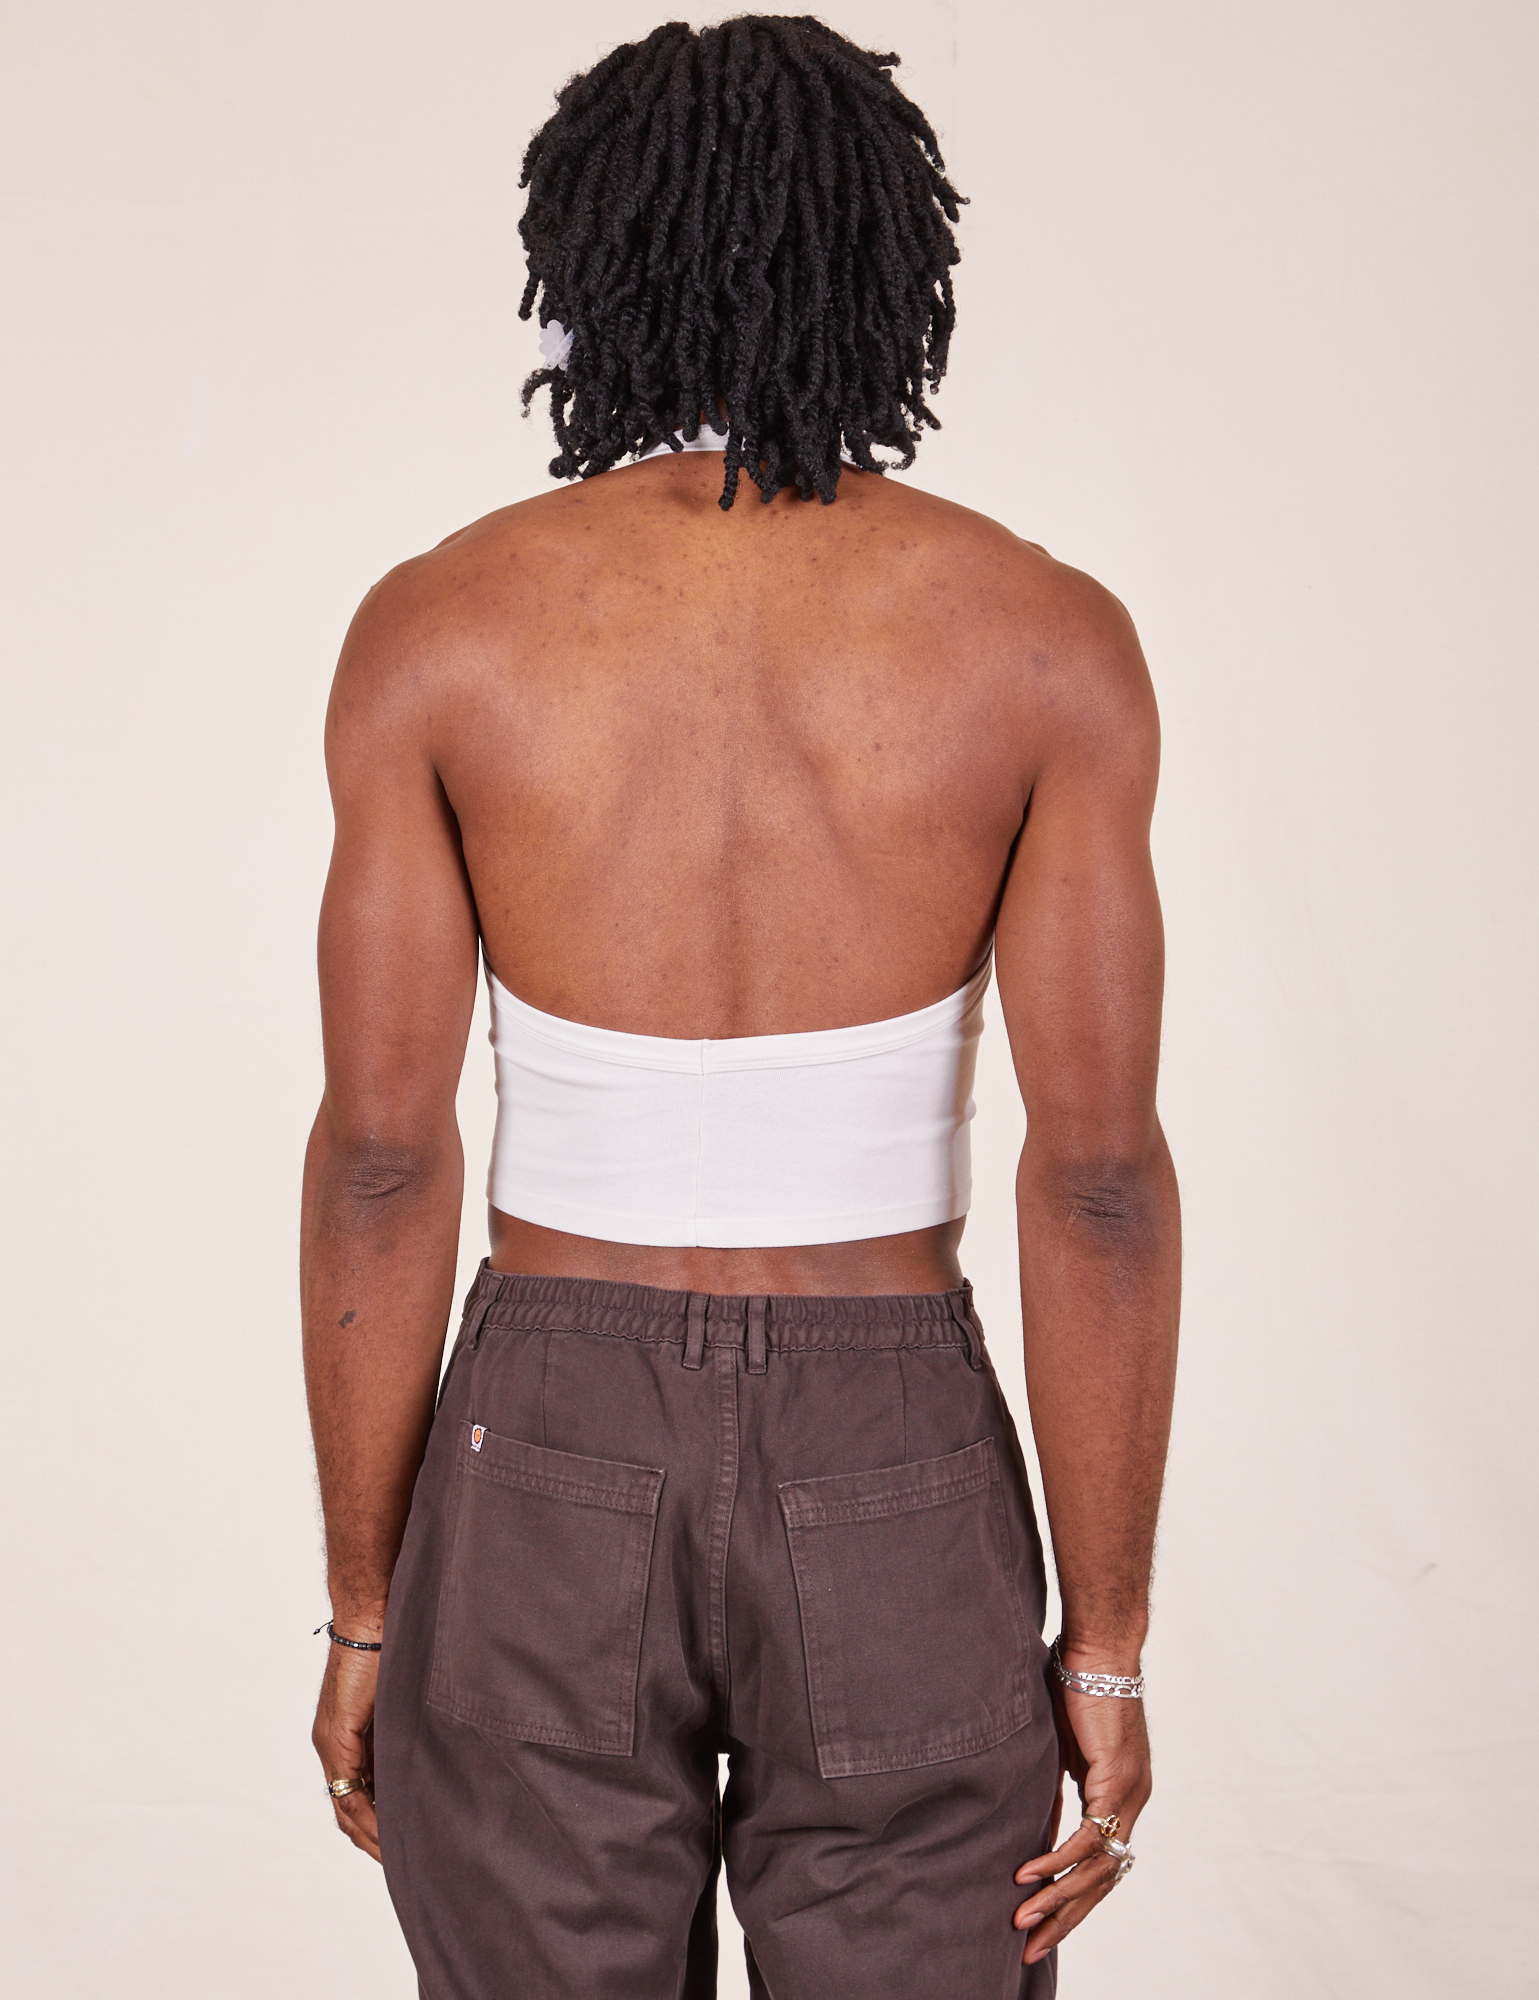 Back view of Halter Top in Vintage Tee Off-White and espresso brown Western Pants worn by Jerrod